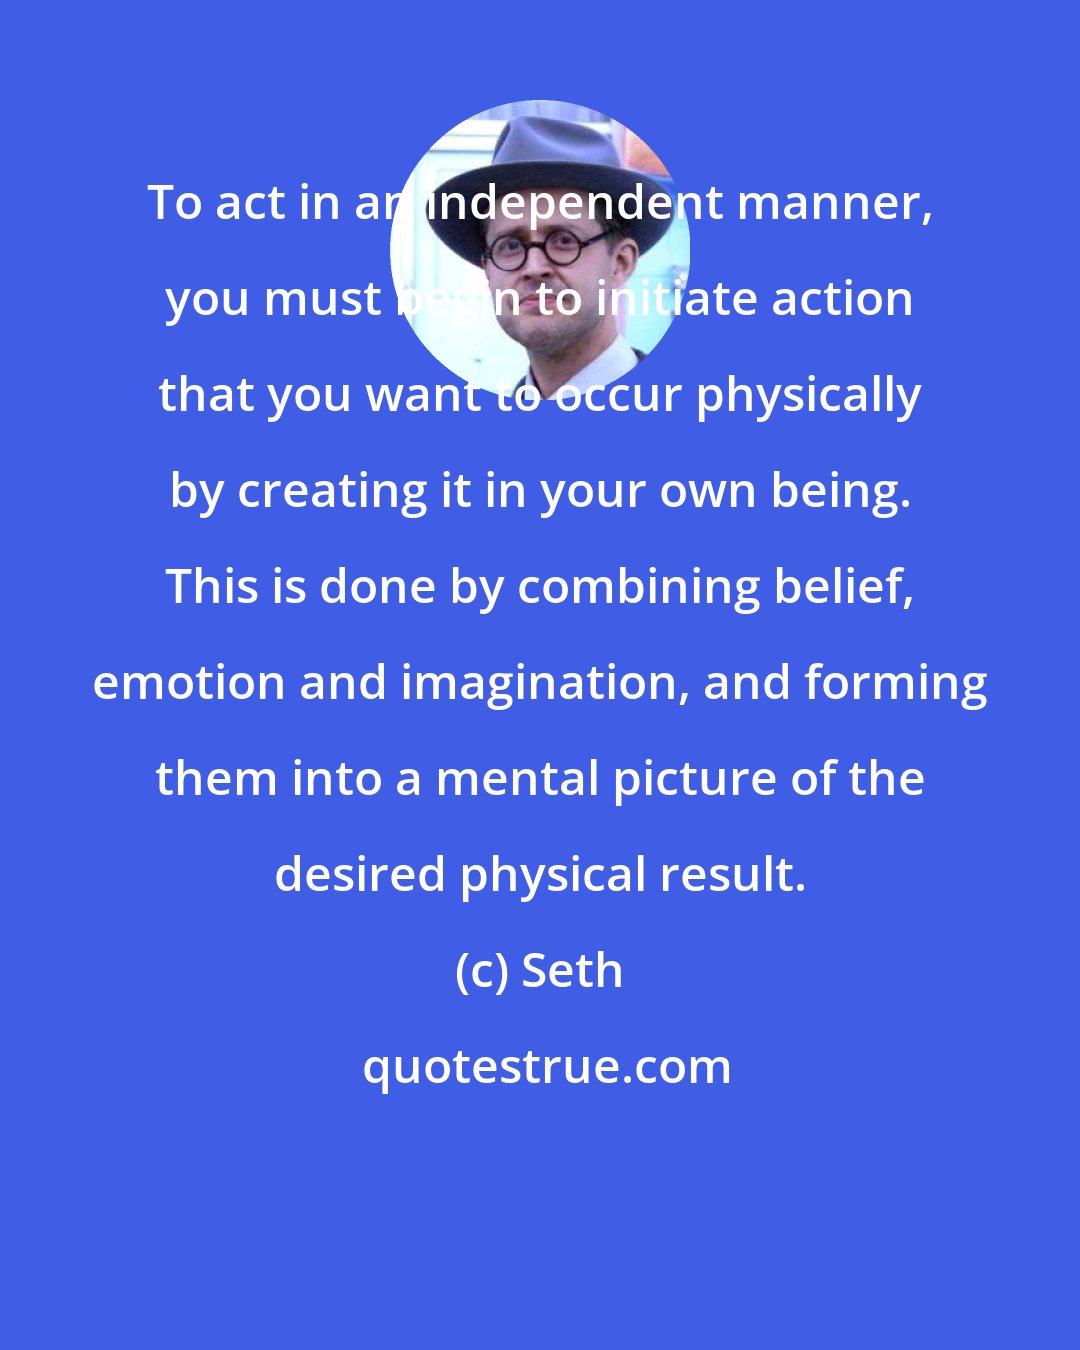 Seth: To act in an independent manner, you must begin to initiate action that you want to occur physically by creating it in your own being. This is done by combining belief, emotion and imagination, and forming them into a mental picture of the desired physical result.